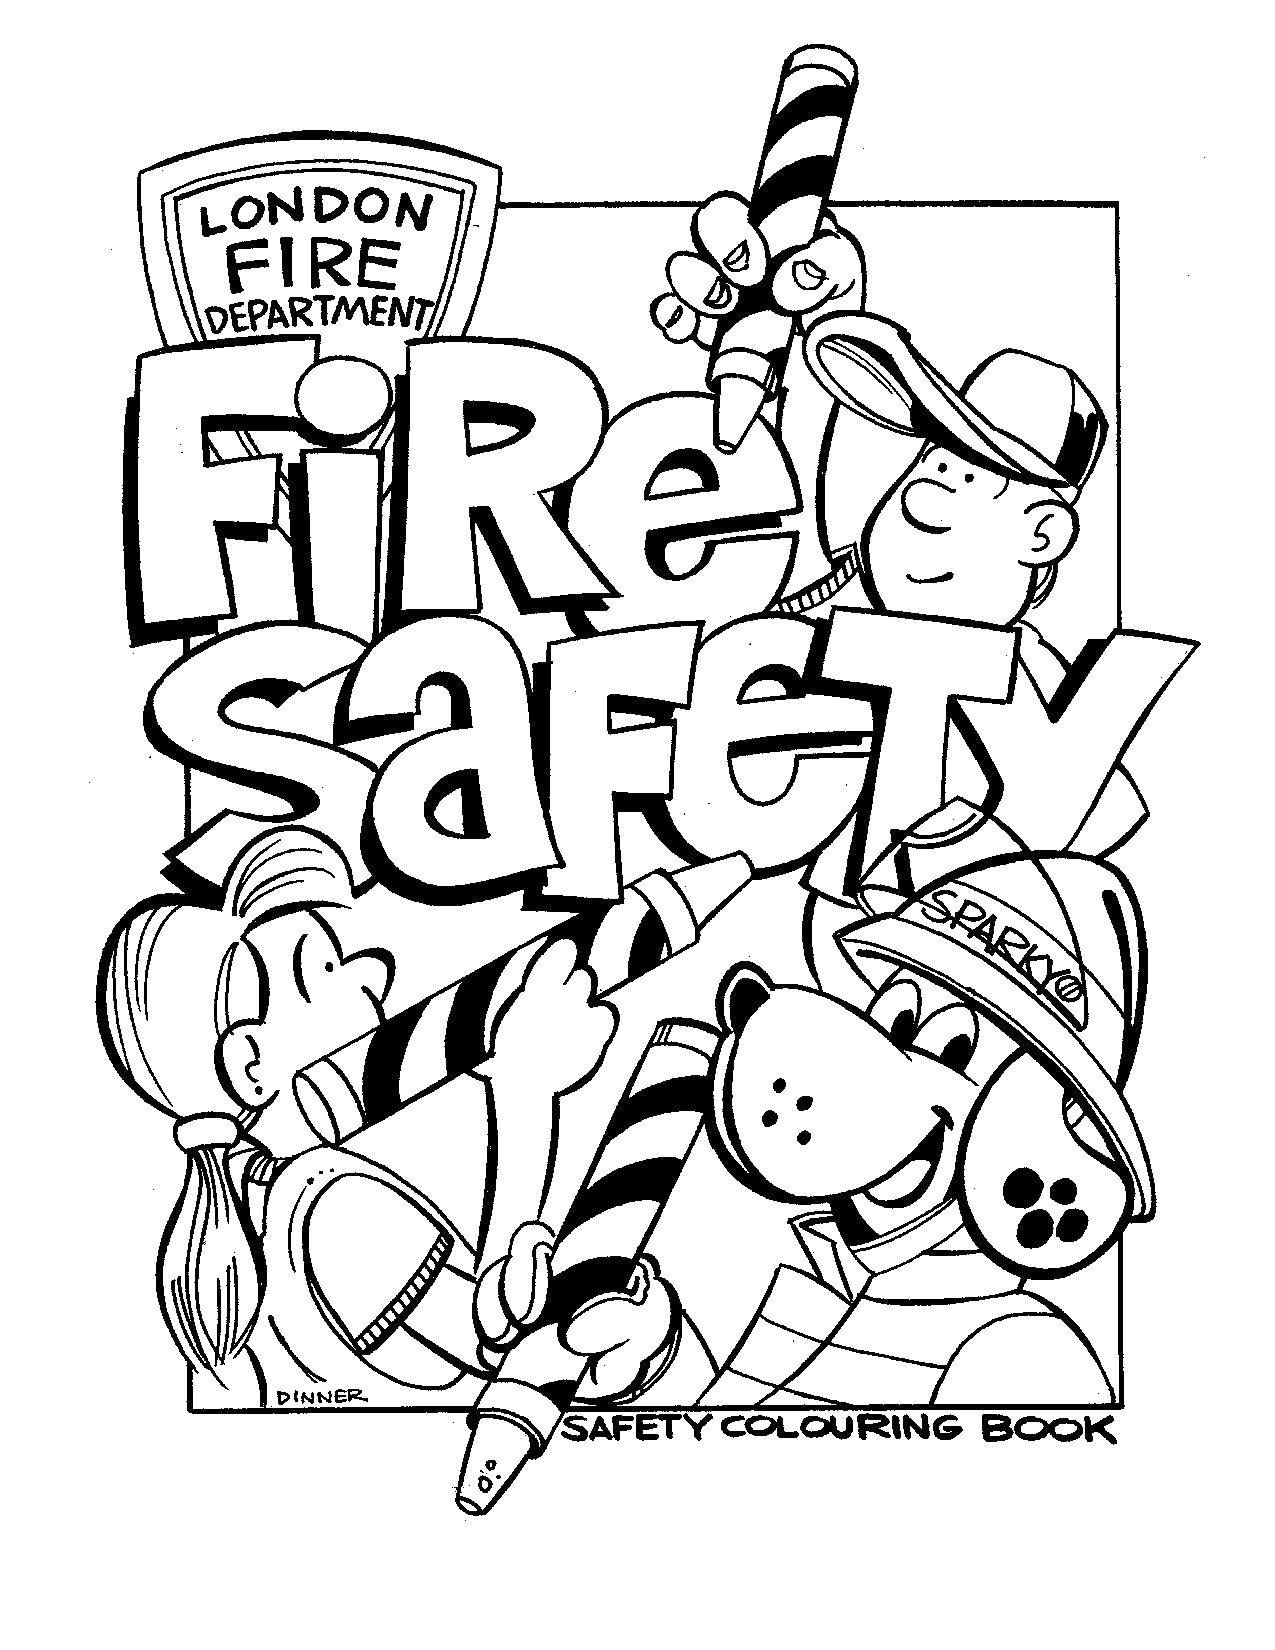 Coloring Fire safety. Category Fire. Tags:  fire, fire, fire safety.